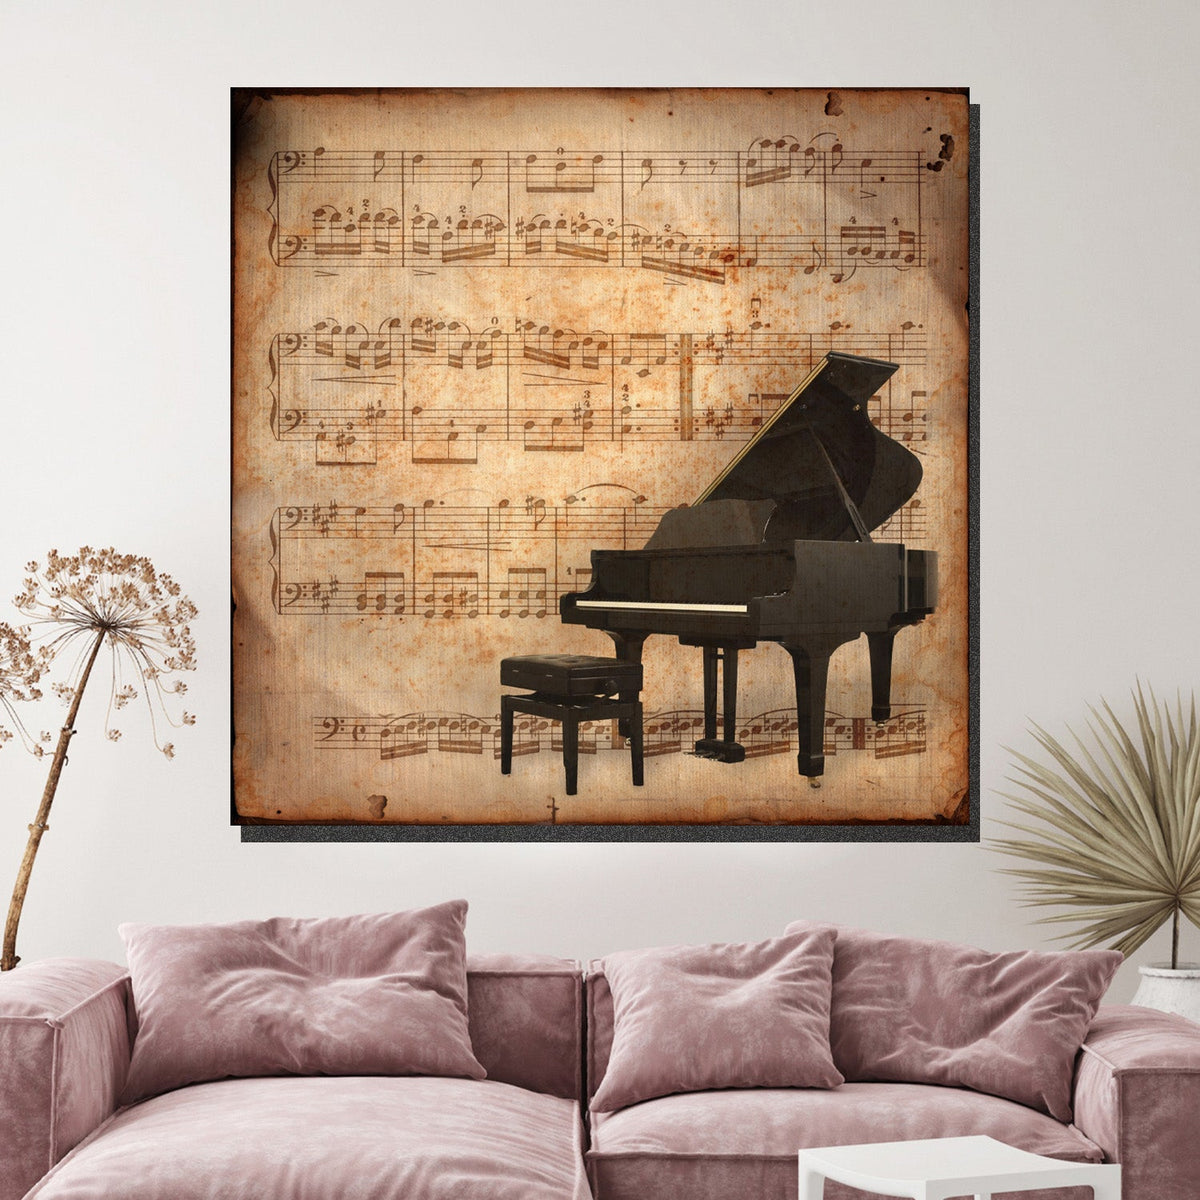 https://cdn.shopify.com/s/files/1/0387/9986/8044/products/AntiquePianoCanvasArtprintStretched-4.jpg